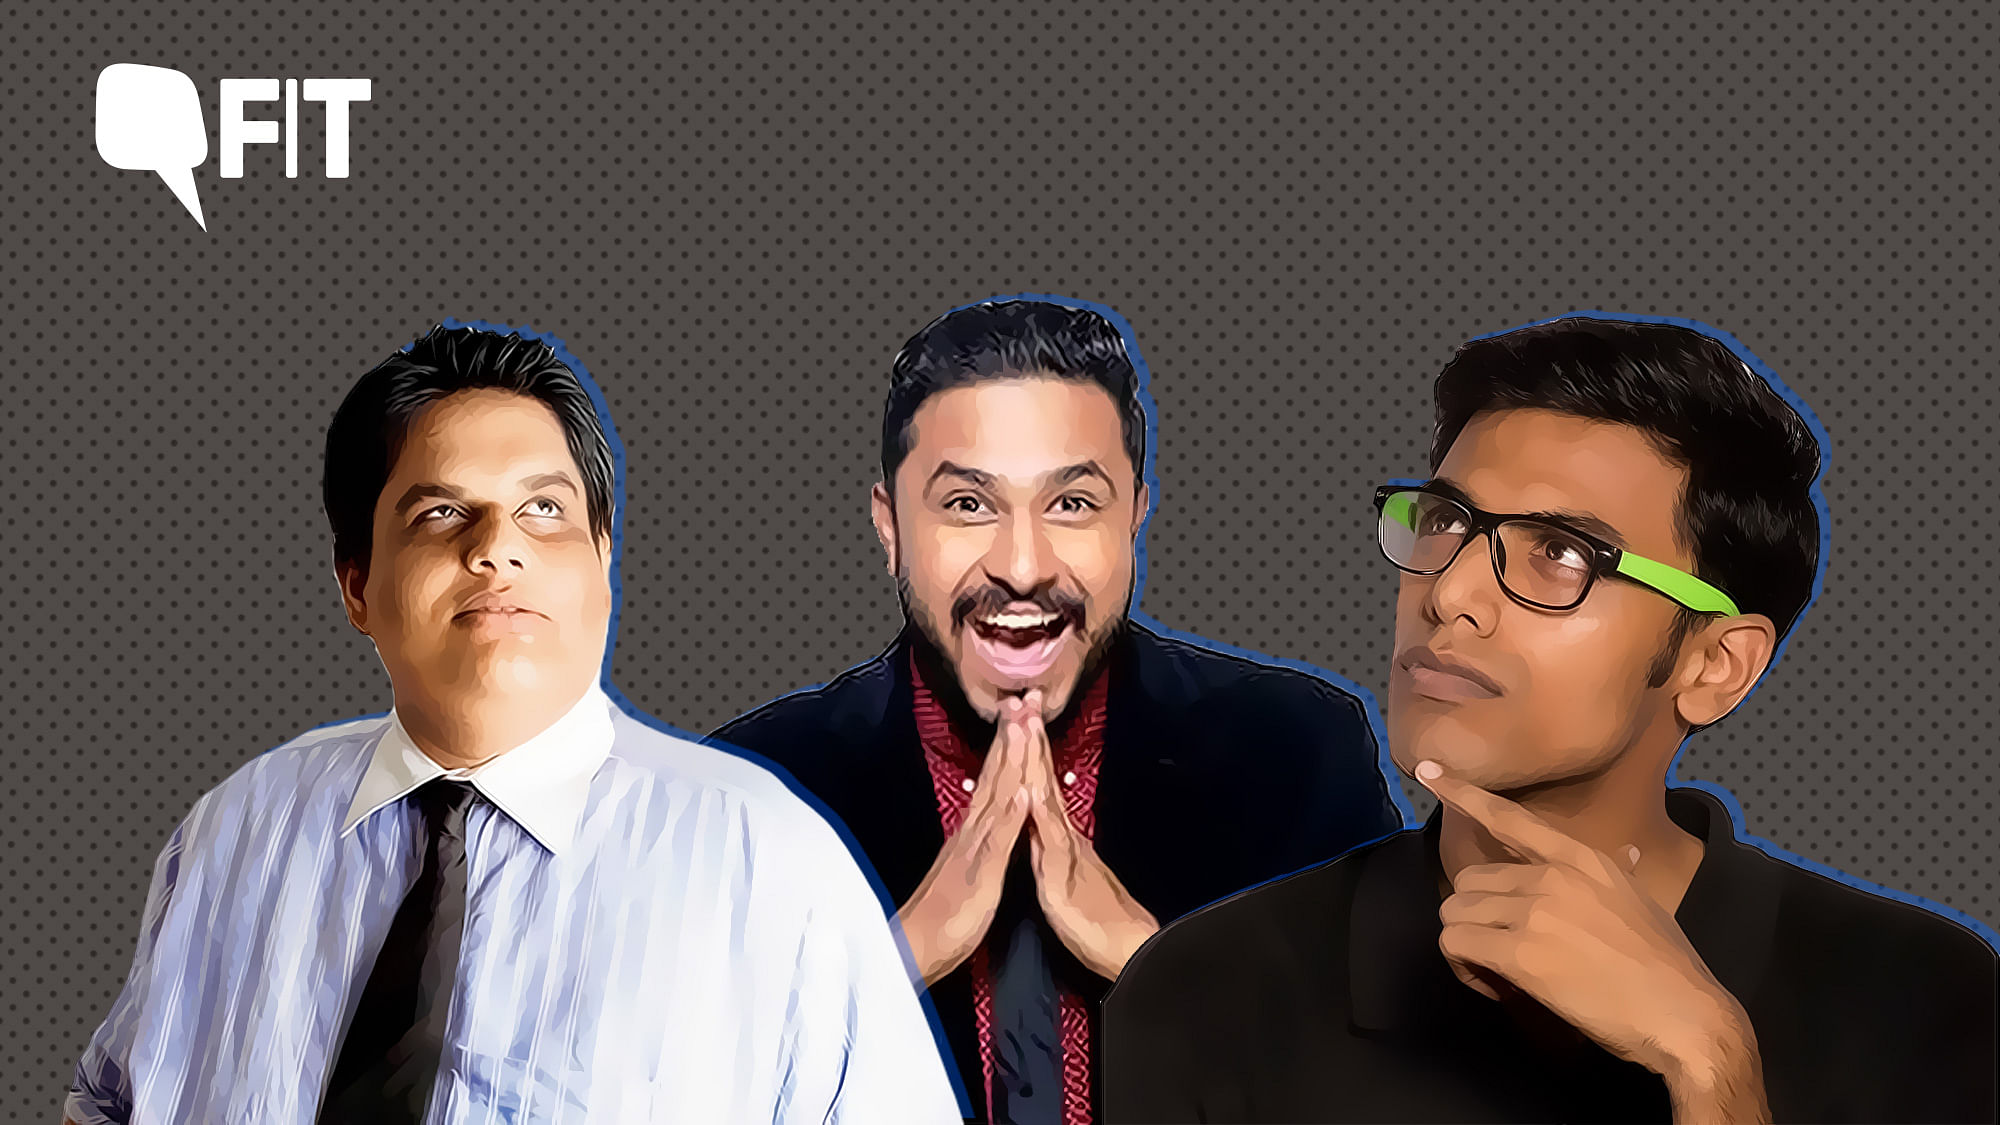 We caught up with comedians Tanmay Bhat, Abish Mathew and Biswa Kalyan Rath to talk mental health.